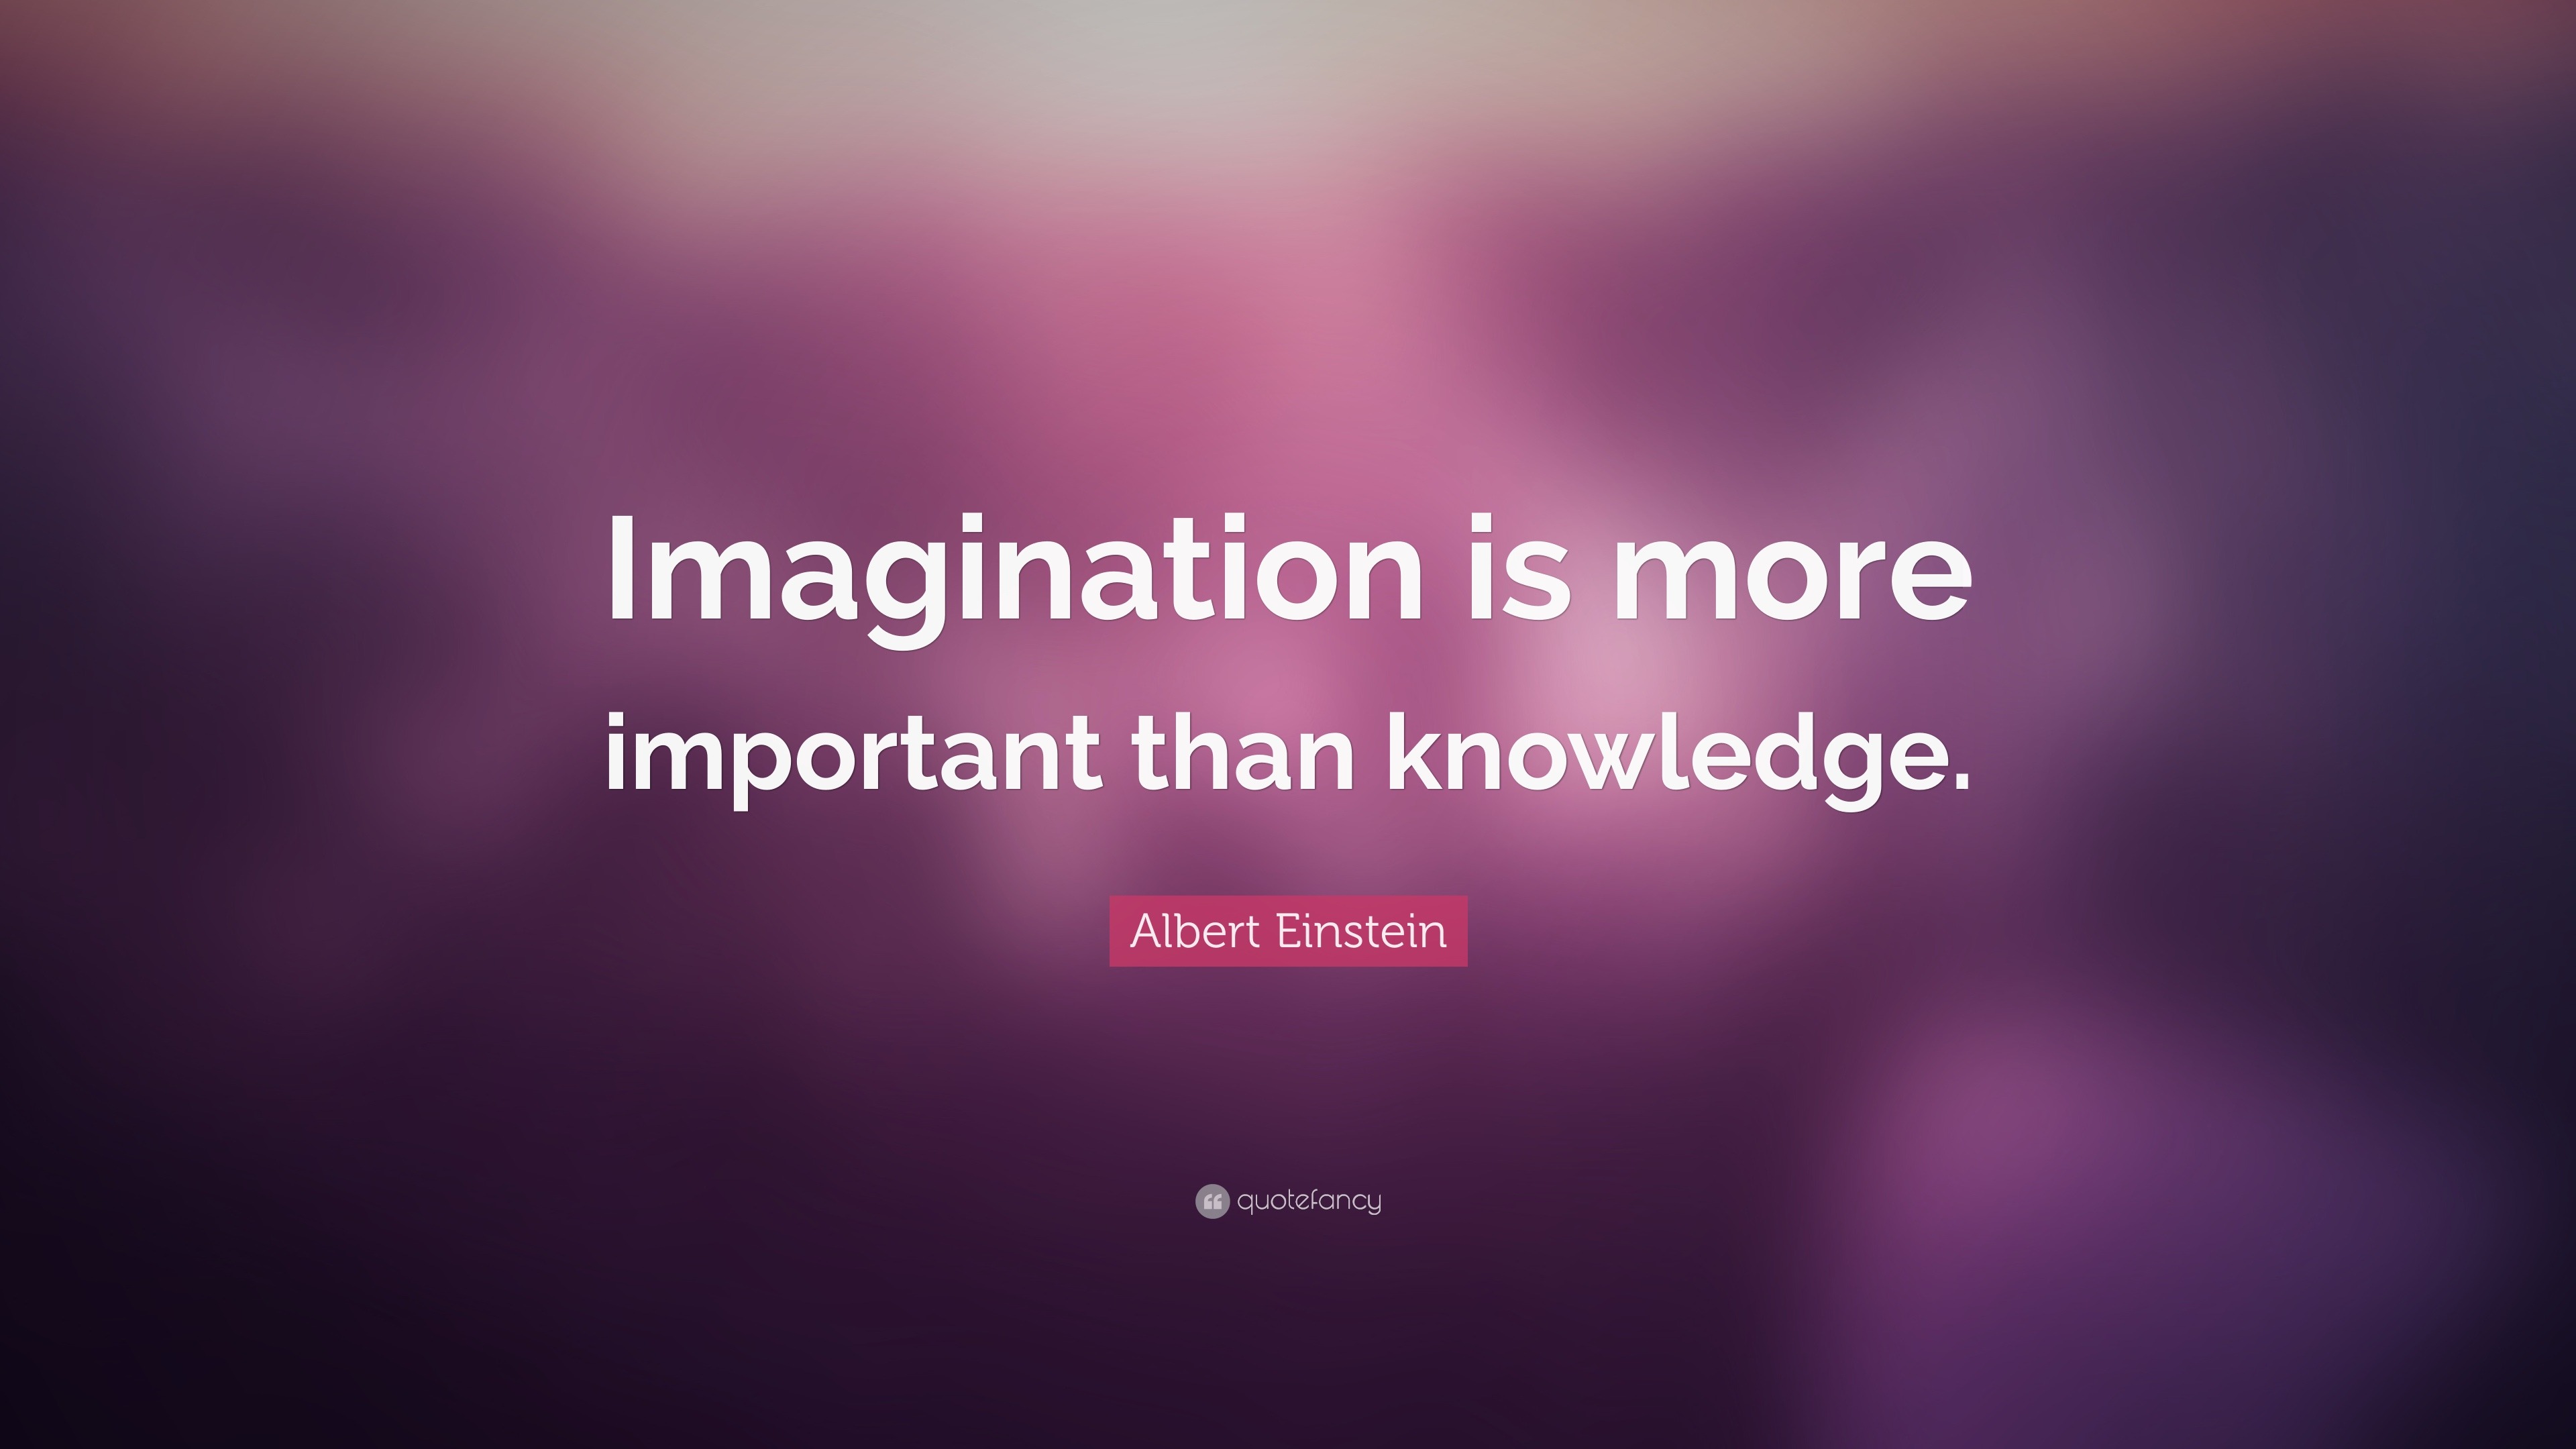 imagination is more important than knowledge essay outline